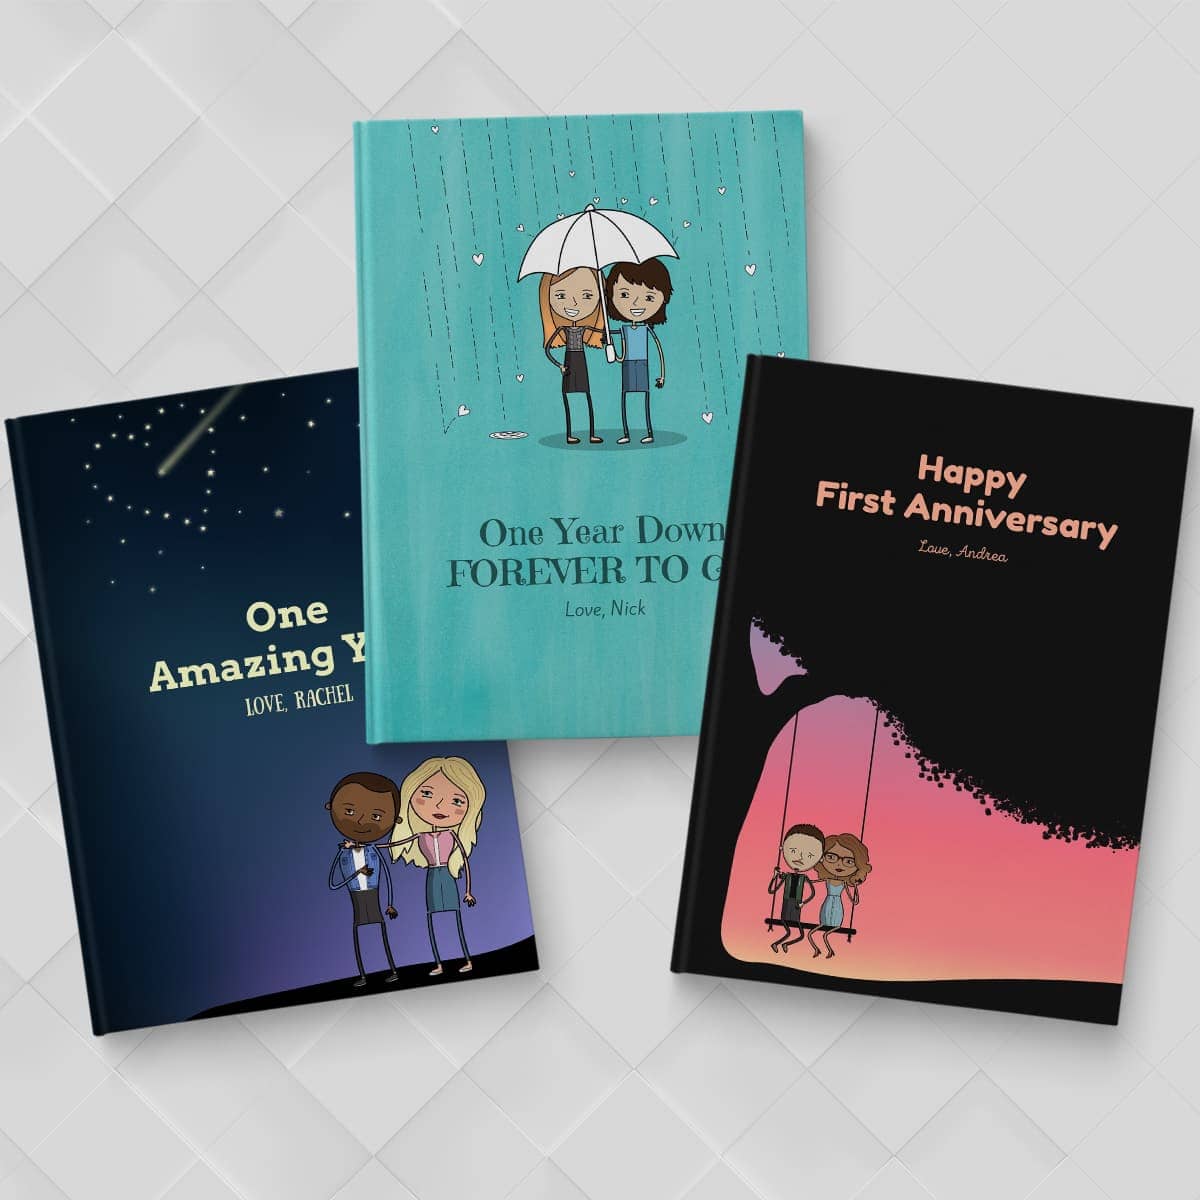 First Anniversary Gifts by LoveBook | The Personalized Gift Book That Says Why You Love Someone | LoveBook Online - 1